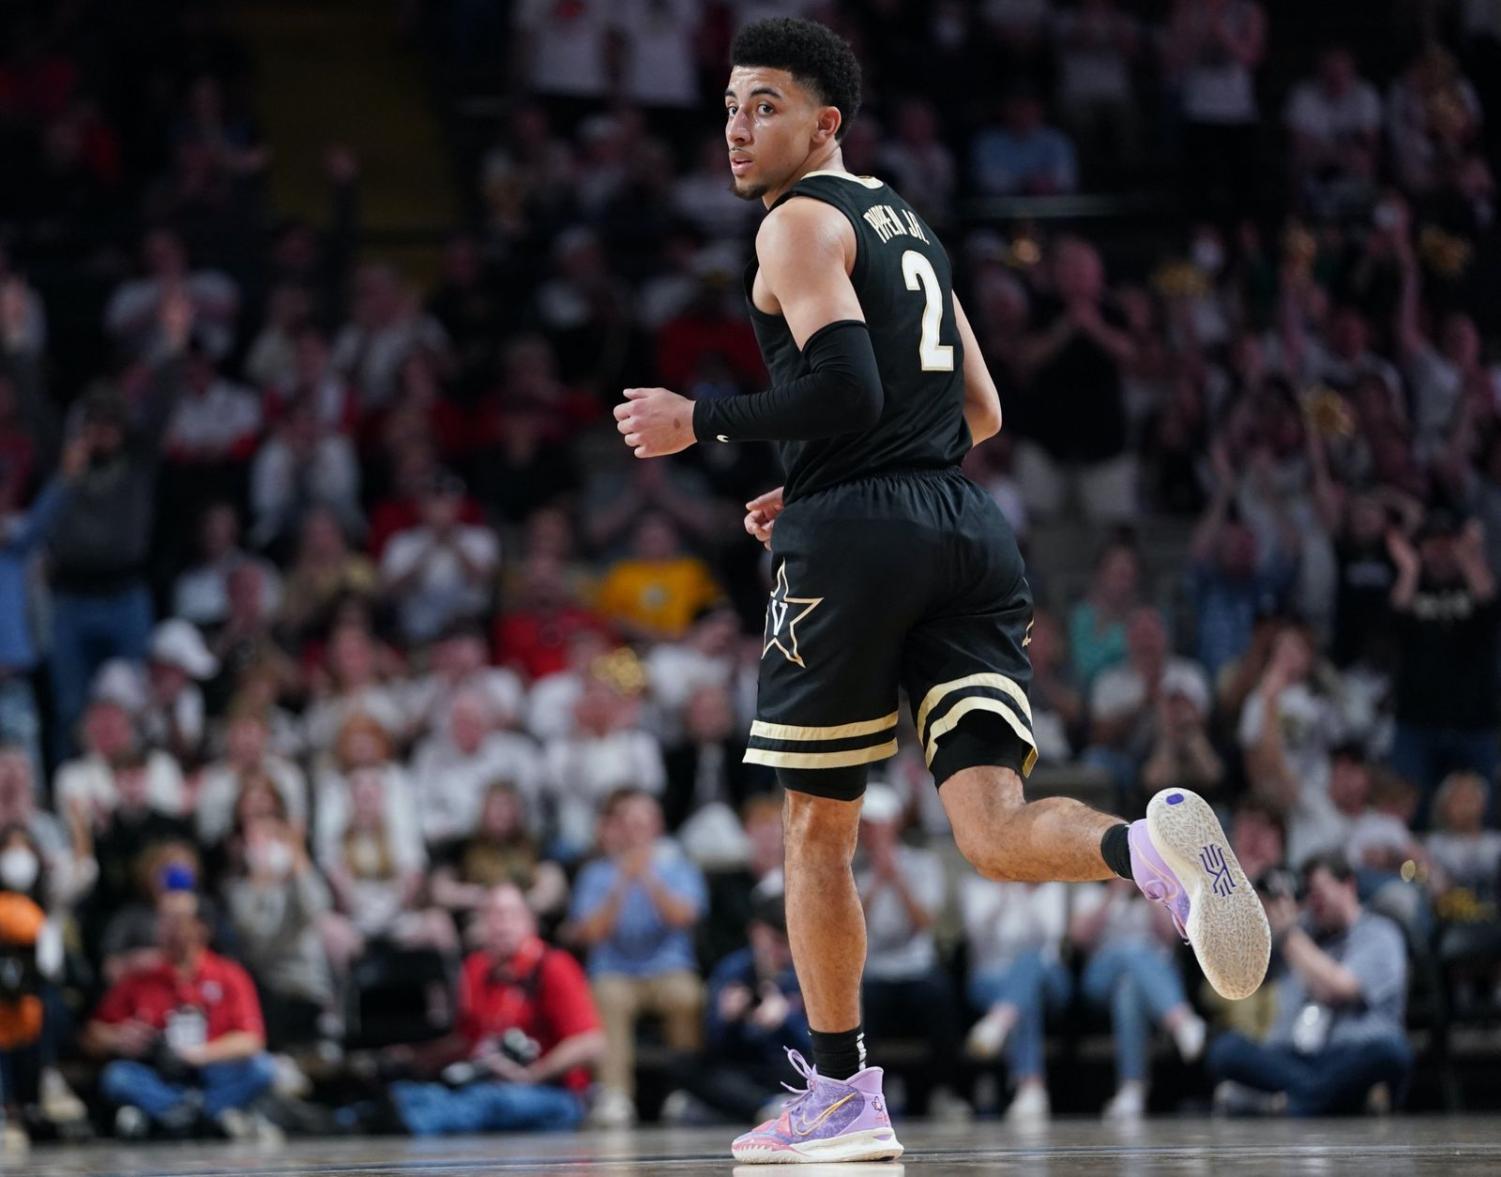 Scotty Pippen's son commits to Vanderbilt basketball - Sports Illustrated